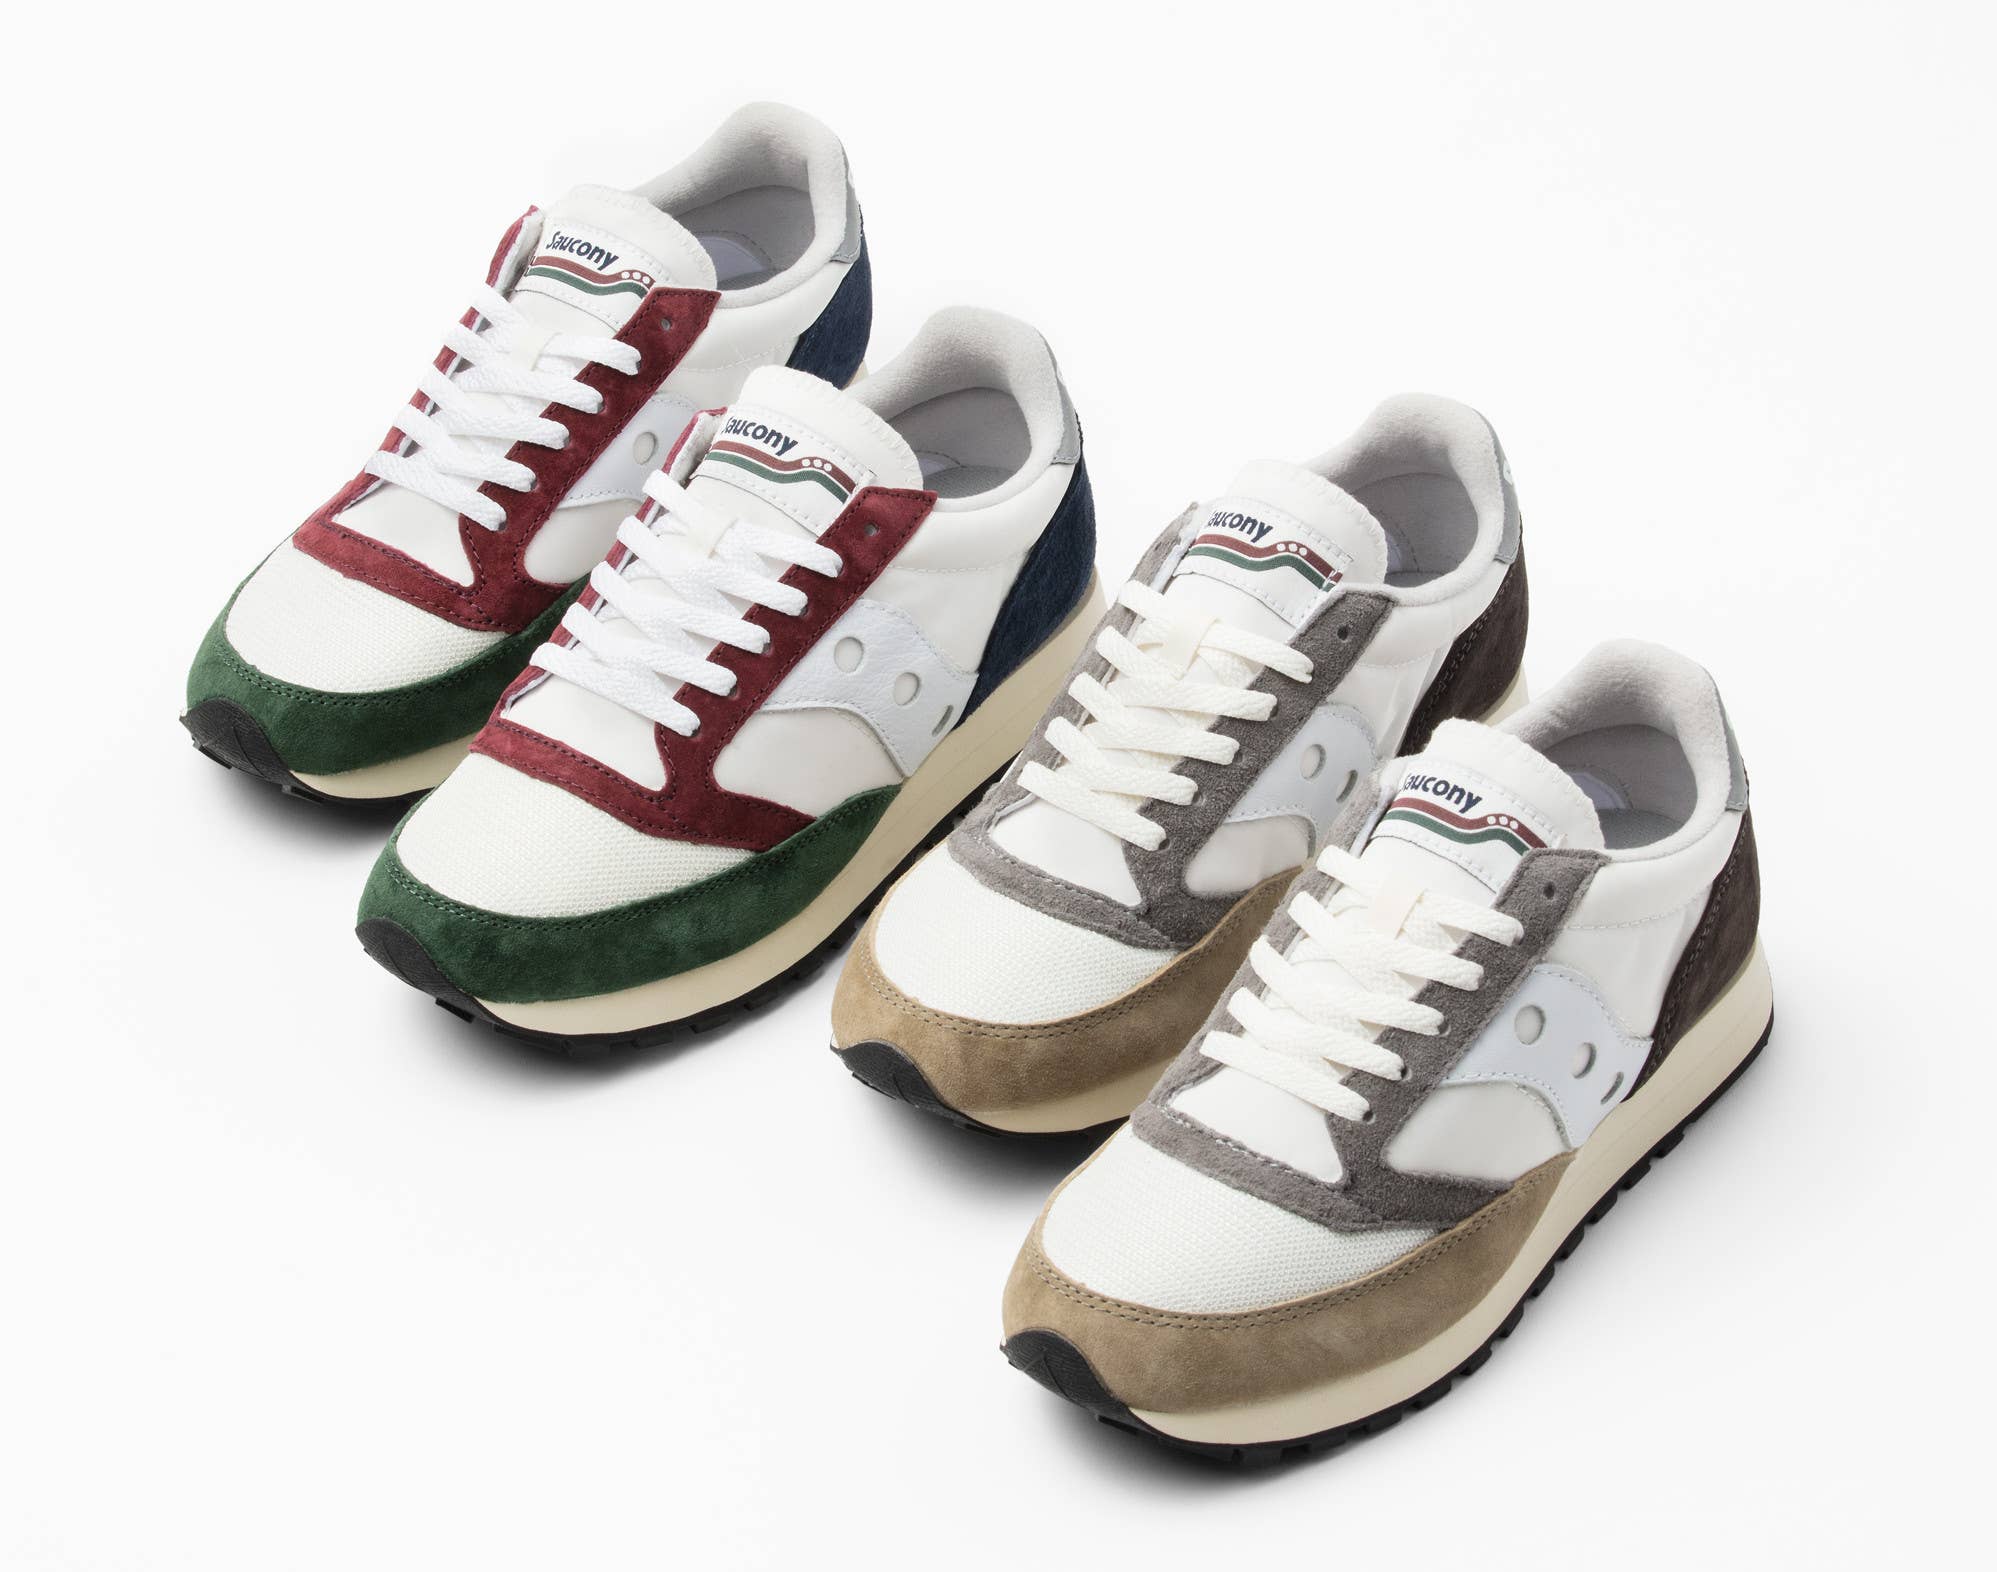 Packer x Saucony Jazz 81 Collection